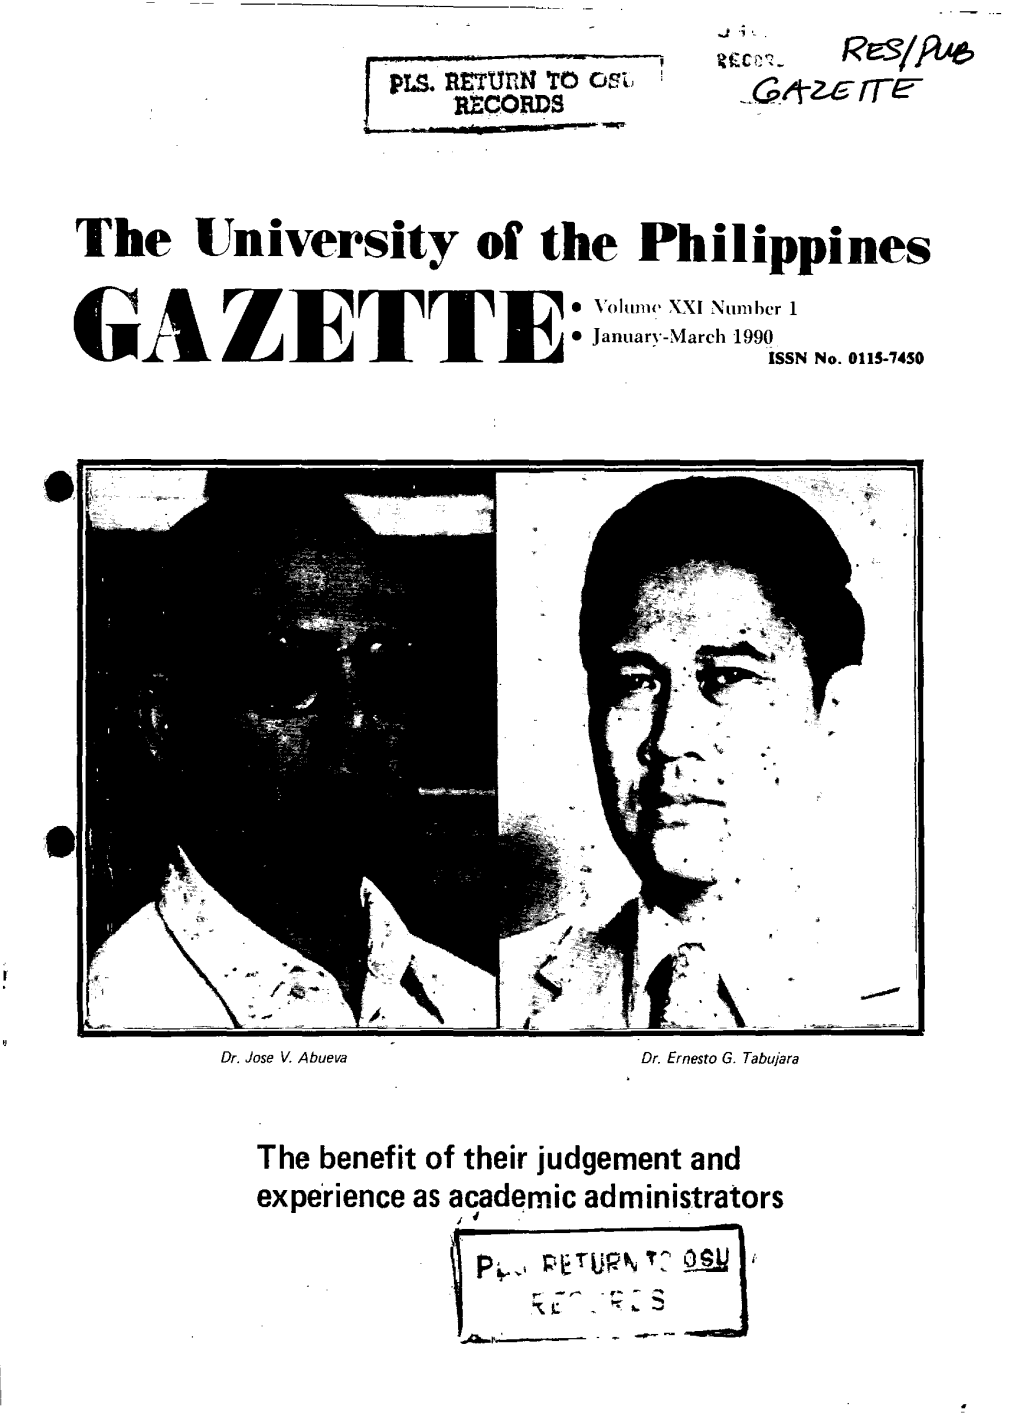 The University of the Philippines Gt-\ZETTE